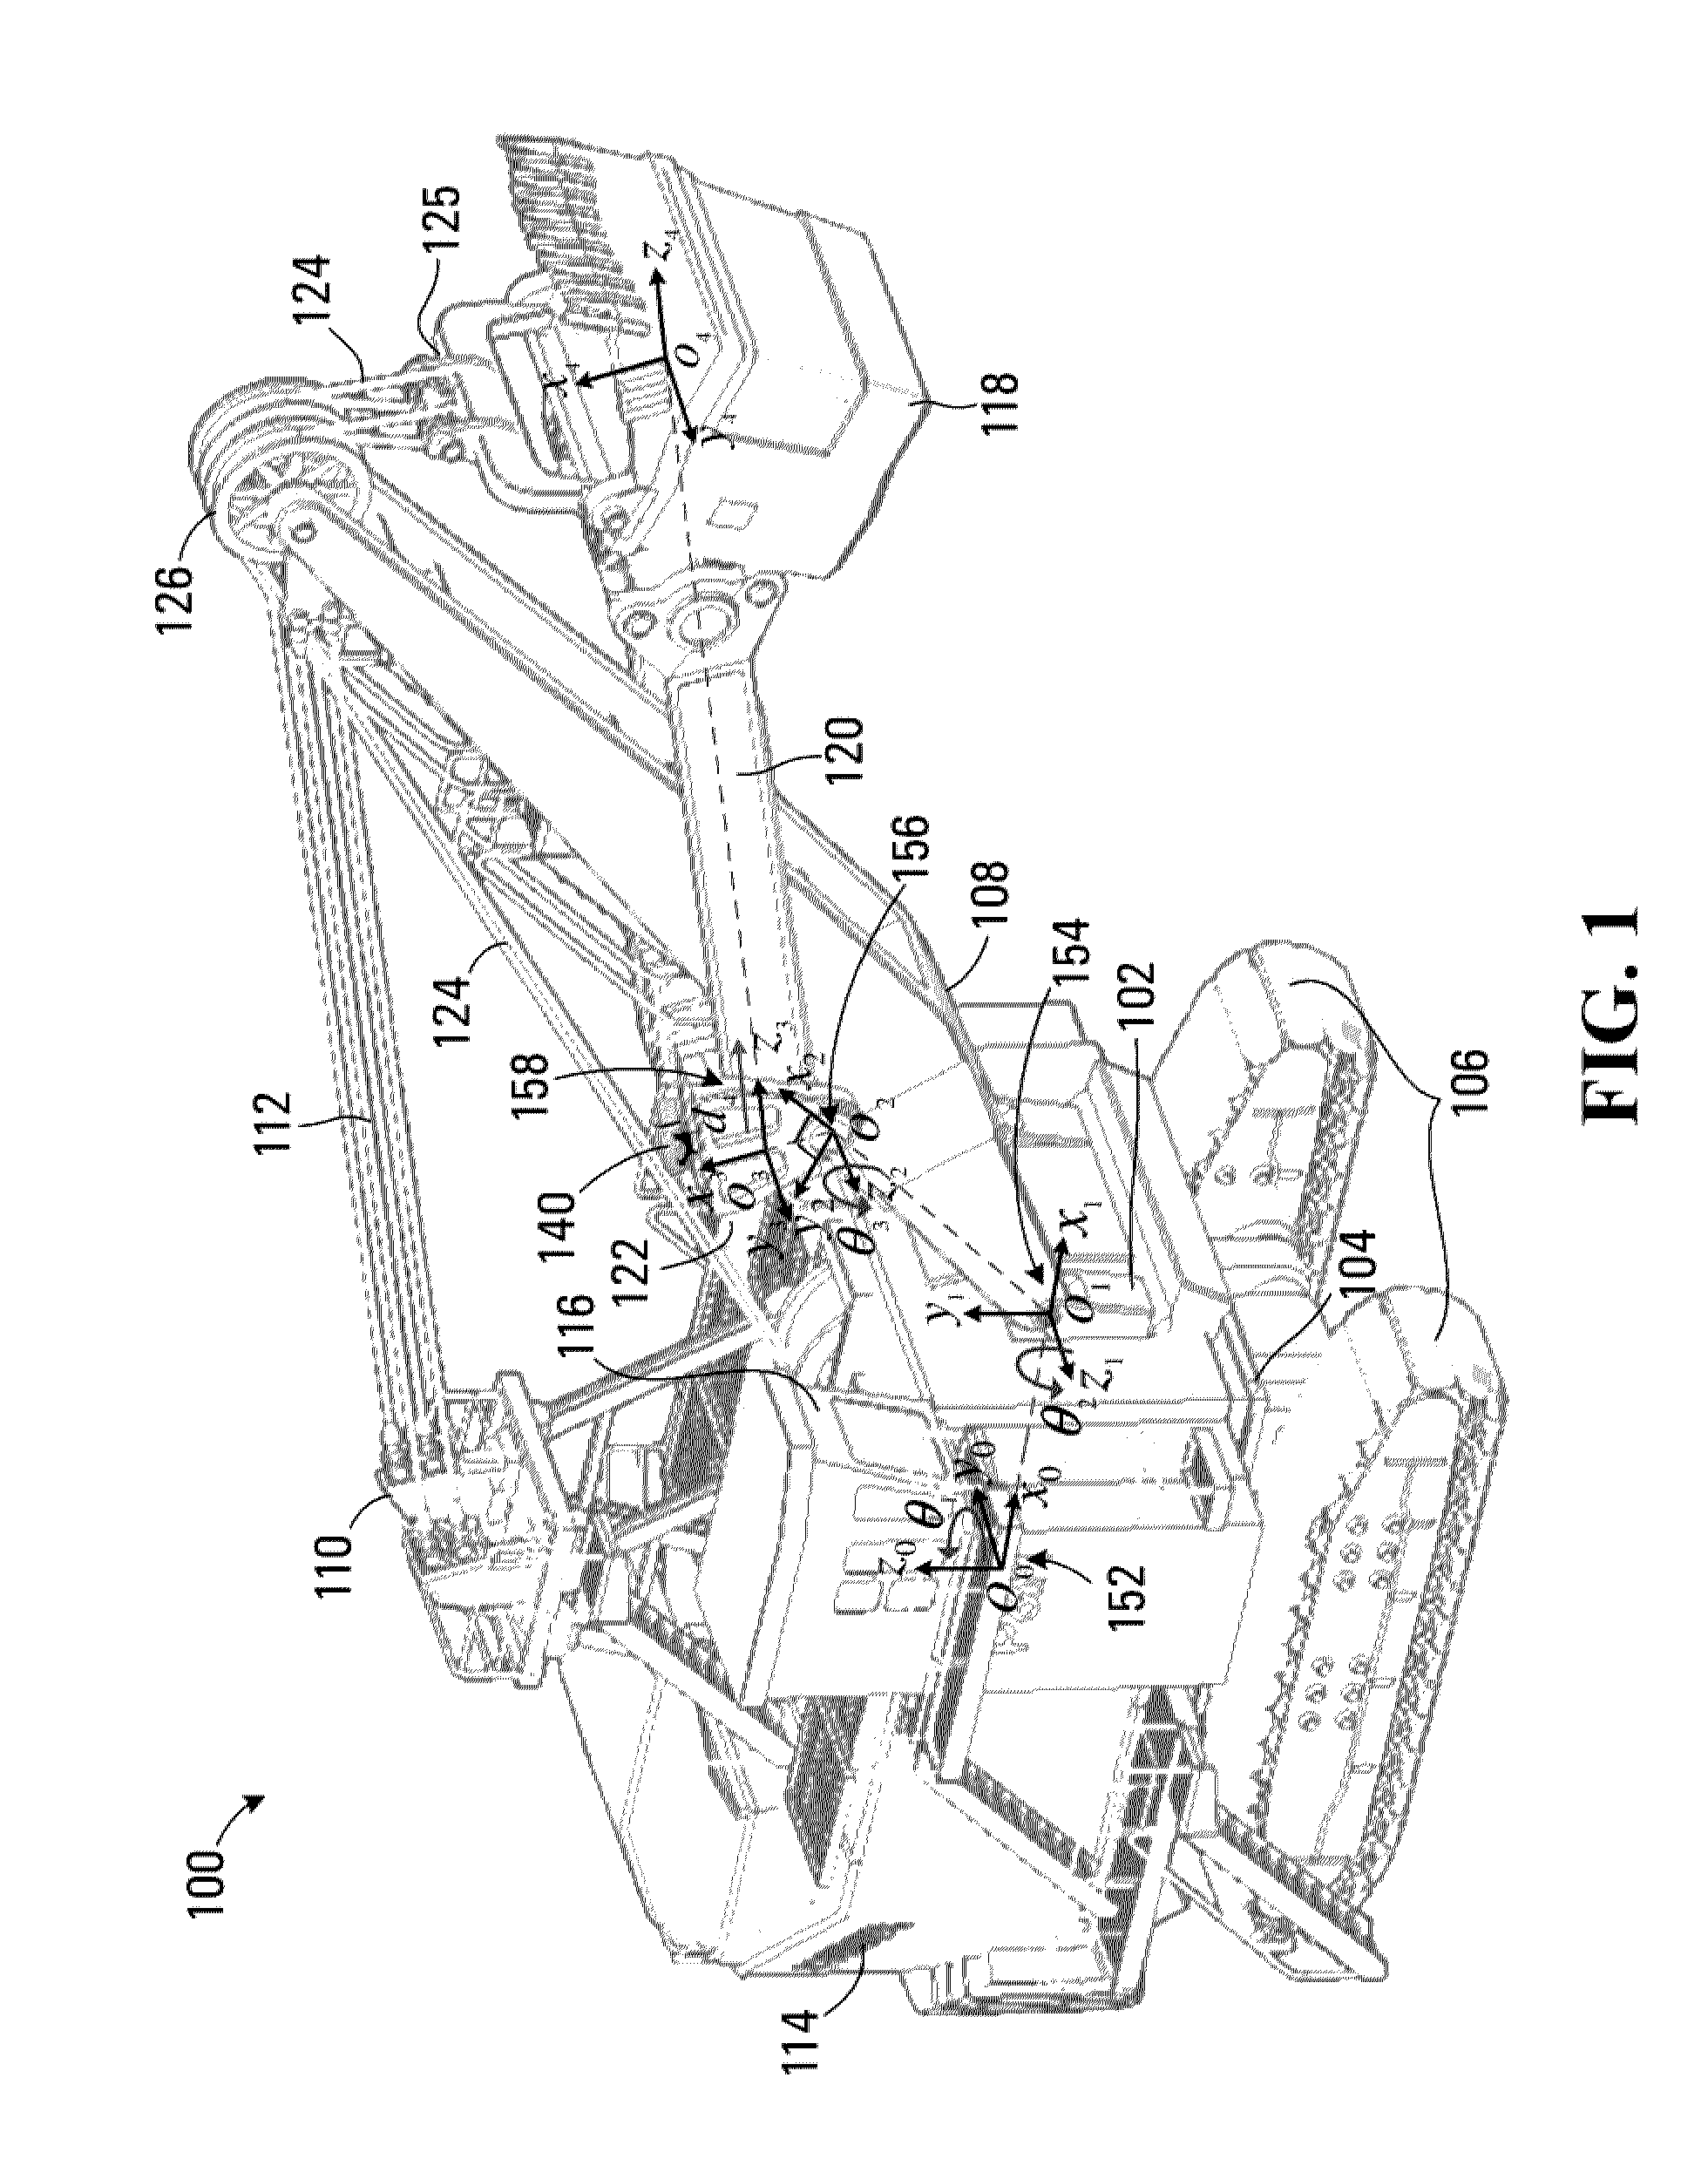 Method and apparatus for determining a spatial positioning of loading equipment